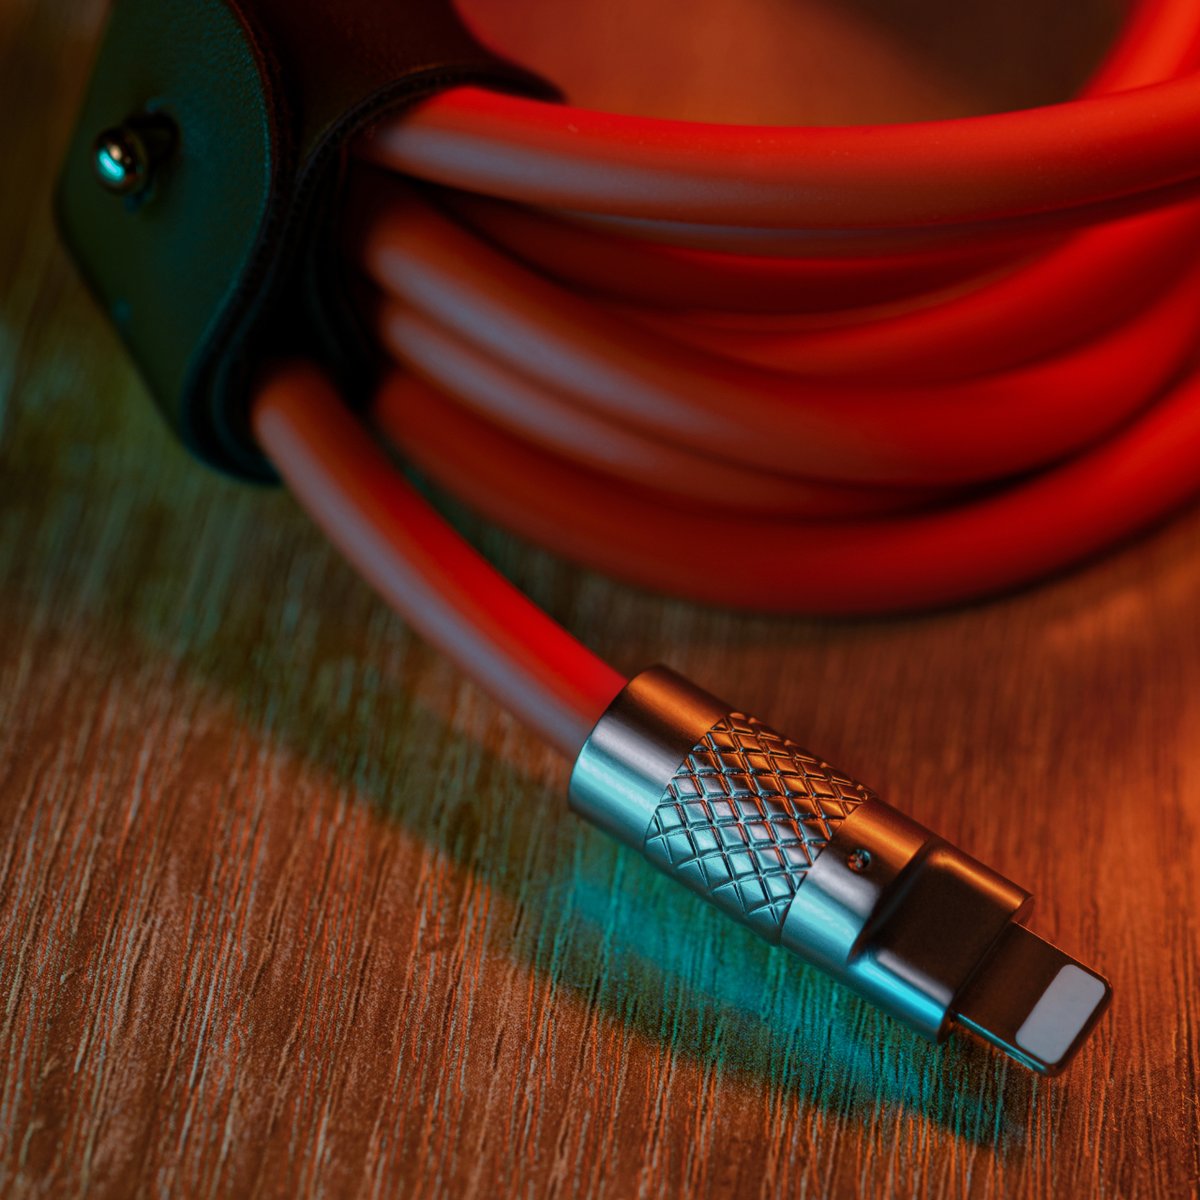 Embrace the orange touch! What's your go-to color? Share in the comments below!  - Isa, #Statik #tsumocharge #technology #orange #chargingcable